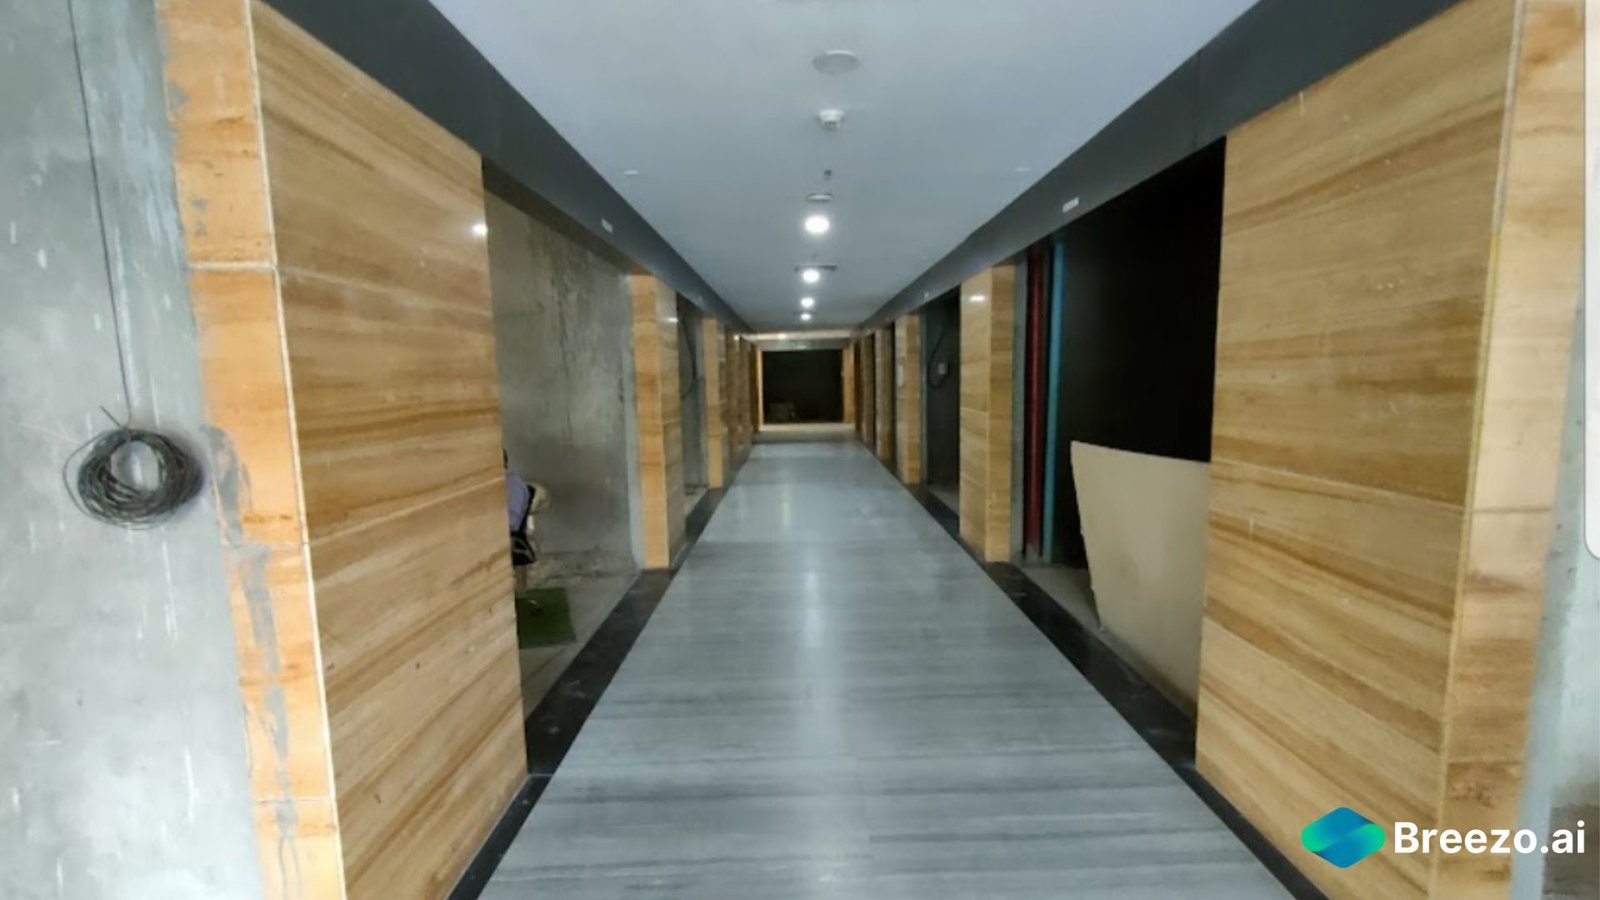 Corporate office for film shoots in Delhi NCR, Gurgaon, and Noida: Modern elegance and stunning features